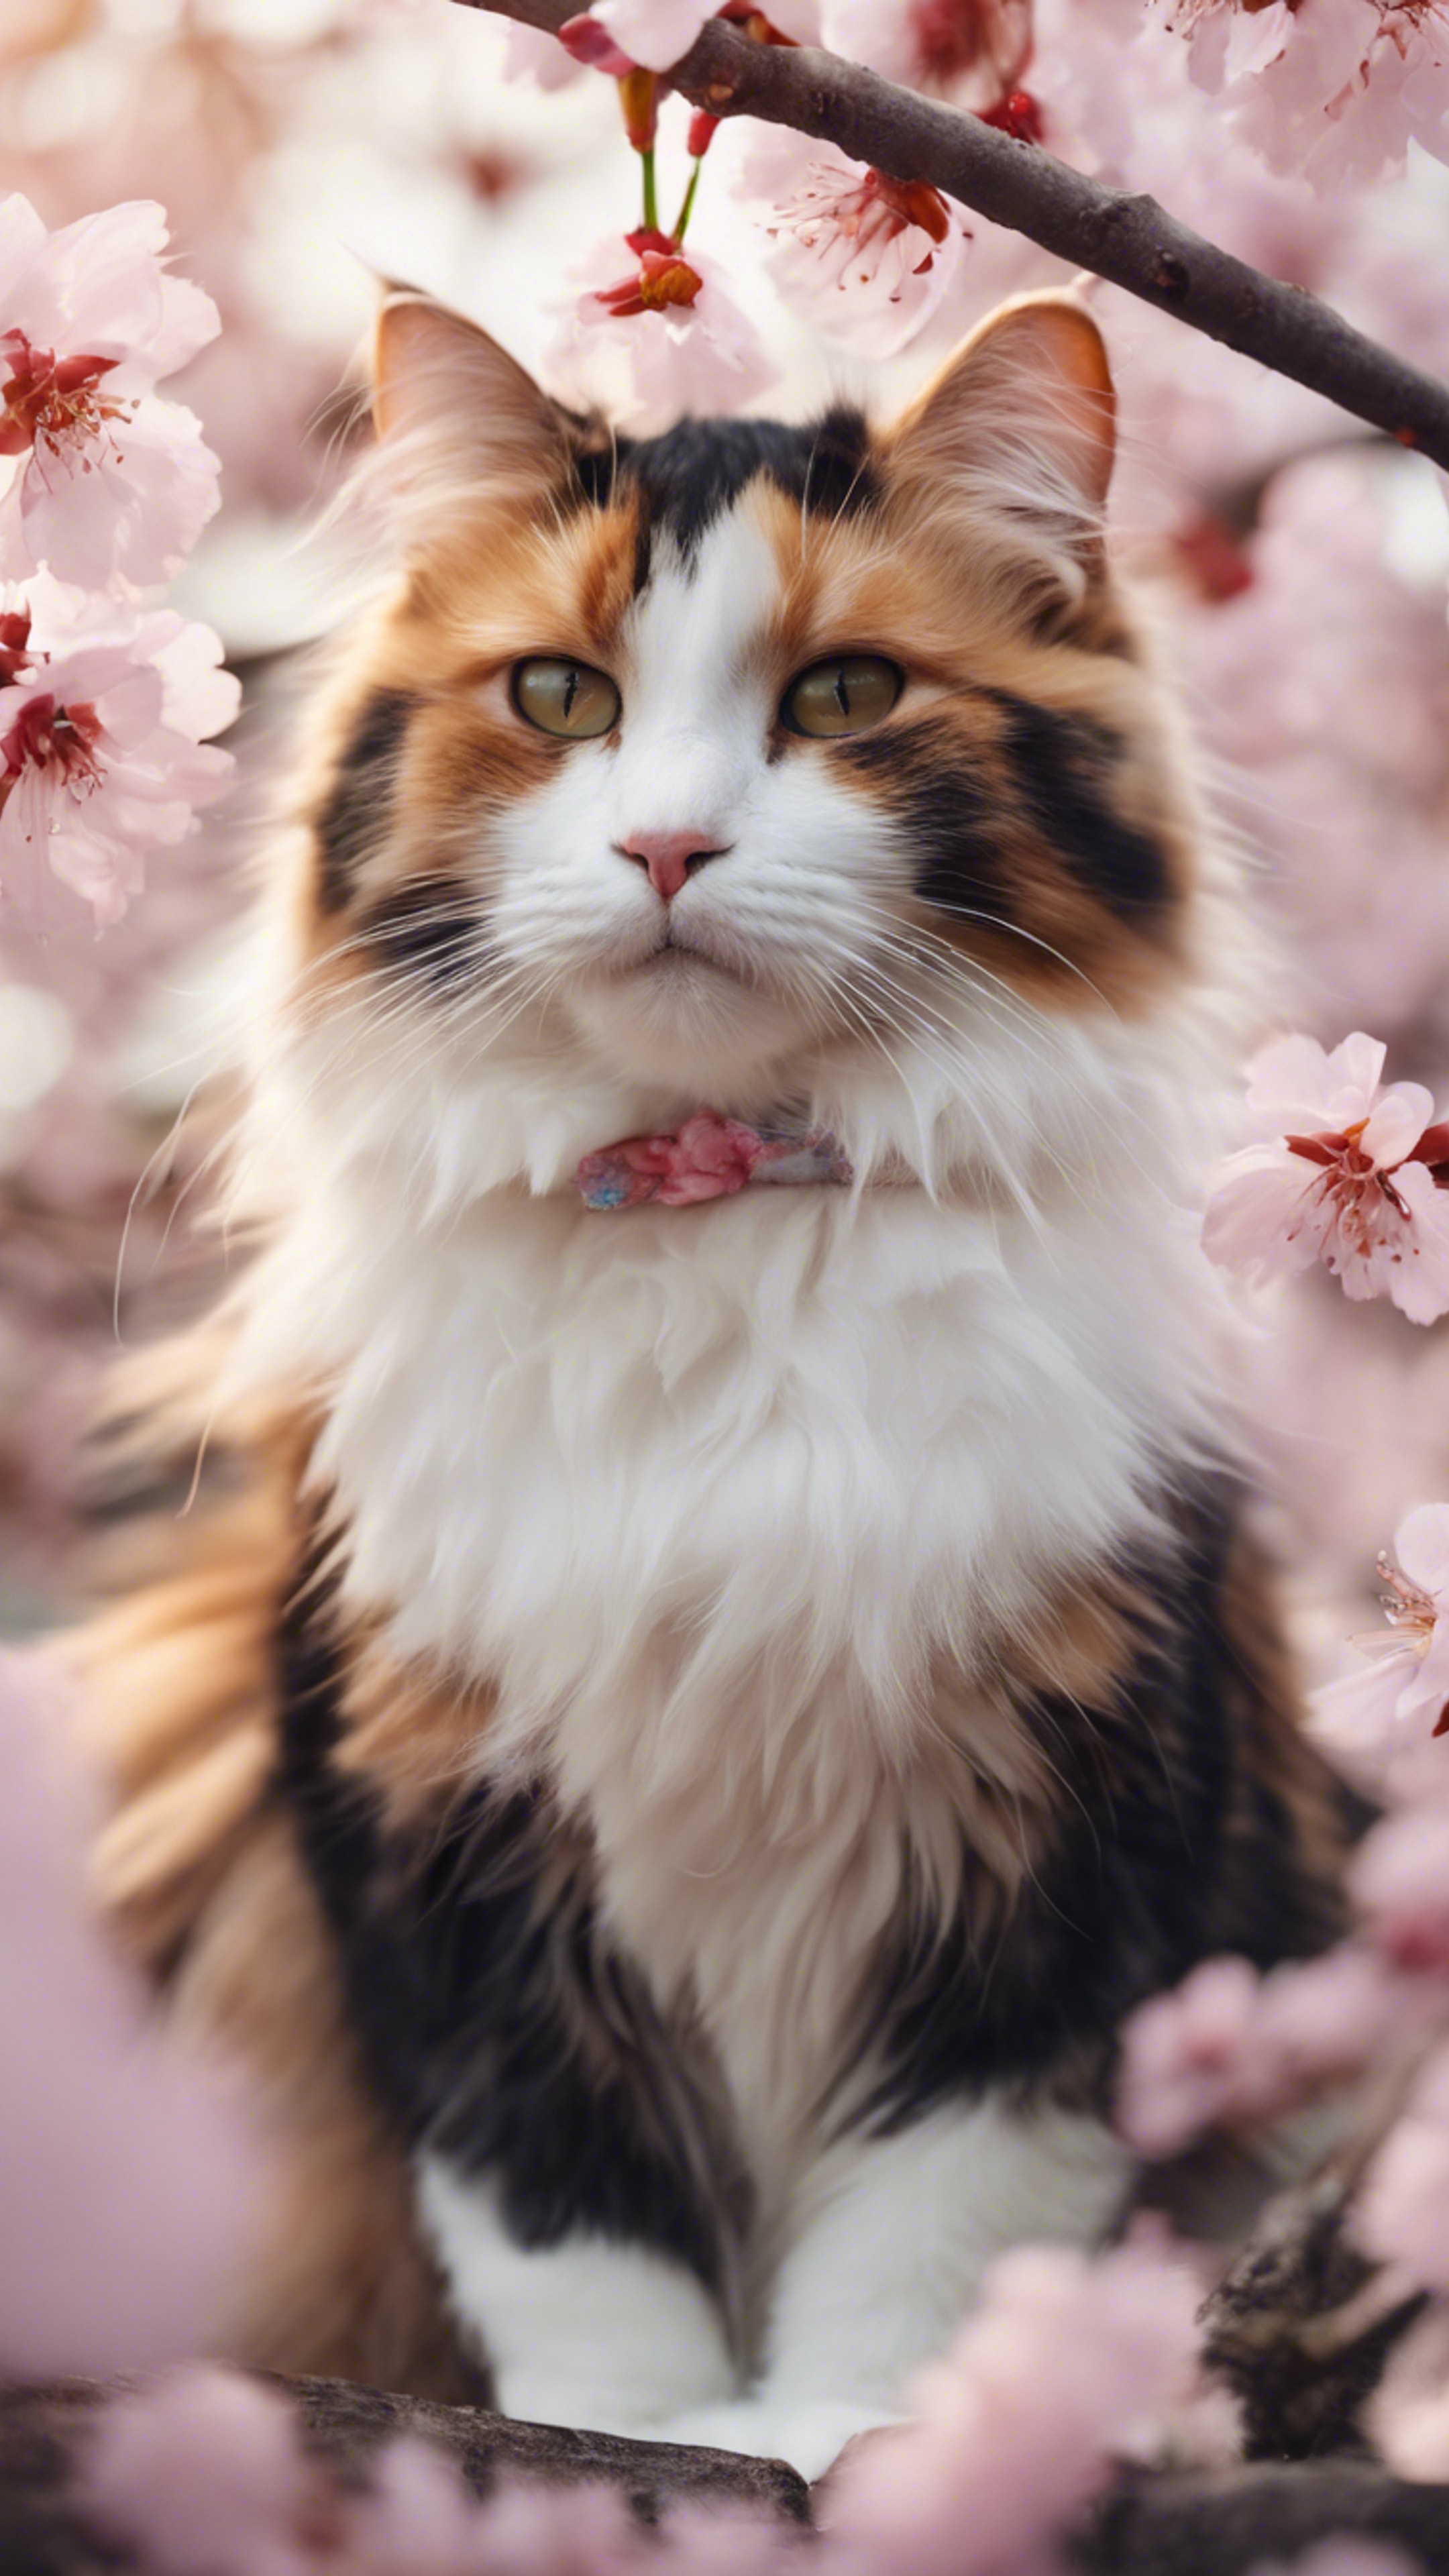 A fluffy calico cat in a cute pose sitting amongst cherry blossoms.壁紙[3cf3847c7c9c4f38aba7]